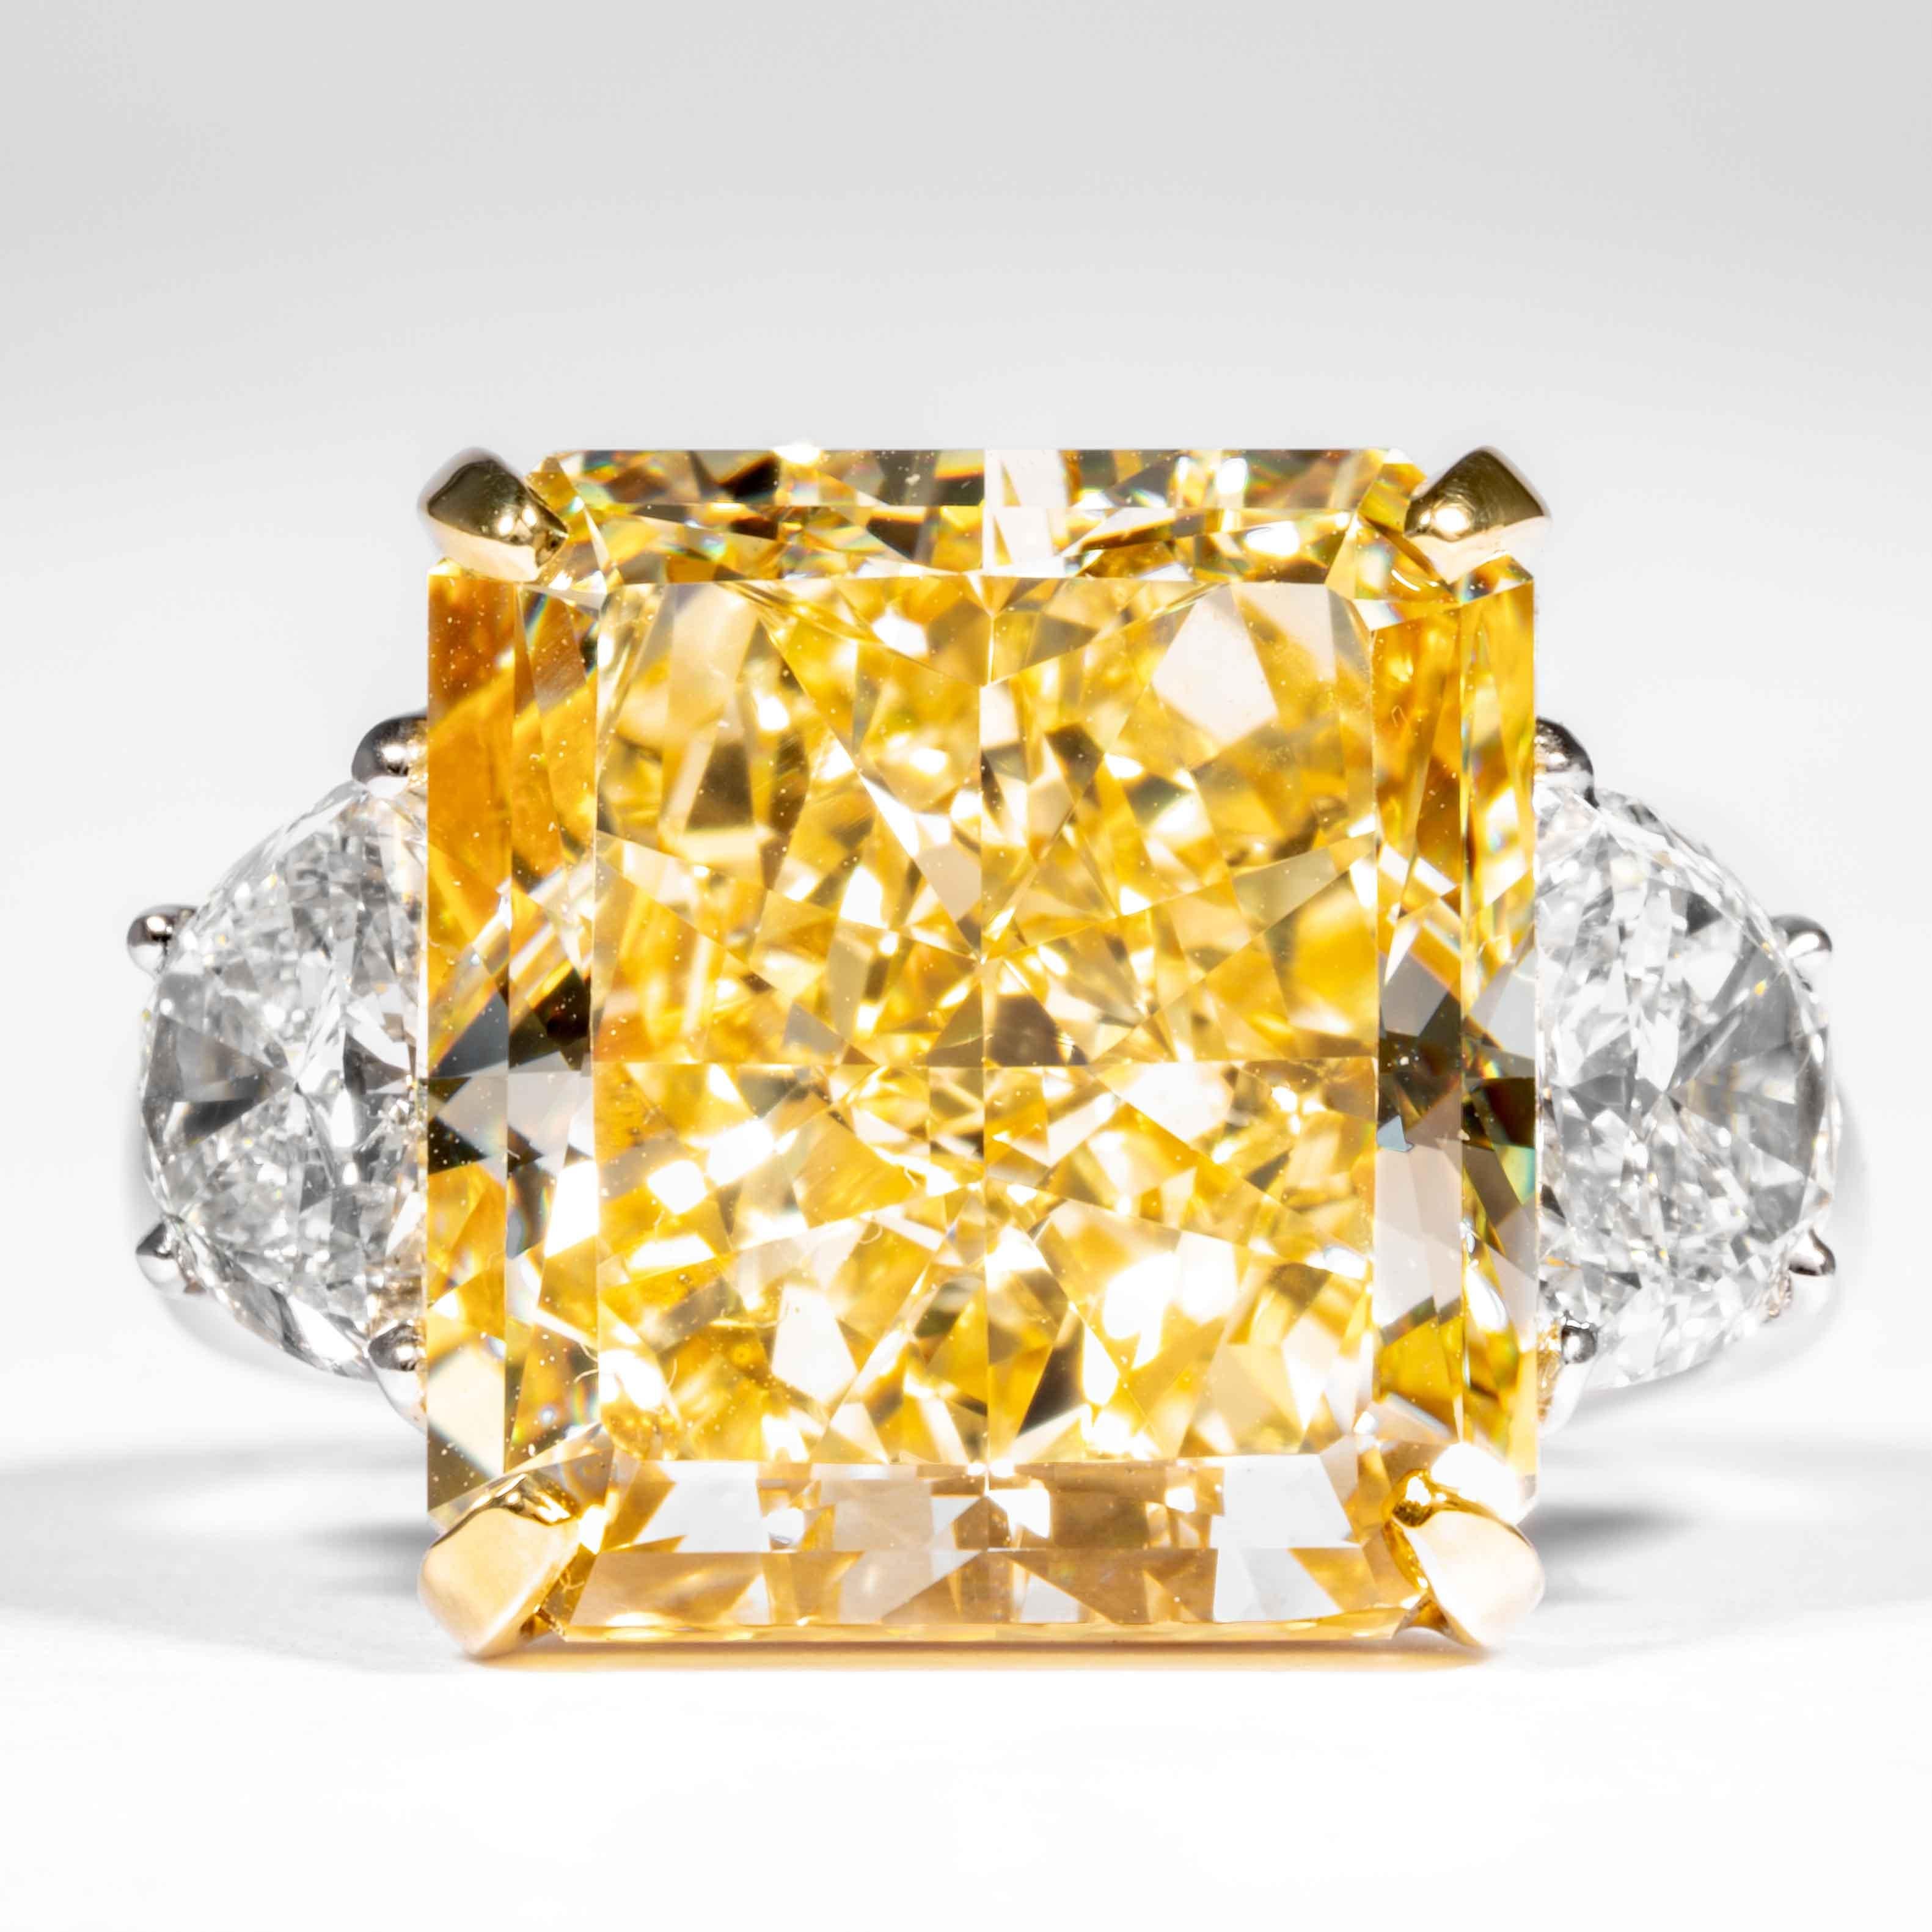 This fancy yellow radiant diamond is offered by Shreve, Crump & Low.  The radiant cut diamond is custom set in a handcrafted Shreve, Crump & Low platinum and 18 karat yellow gold 3 stone ring consisting of 1 radiant cut yellow diamond weighing 14.63